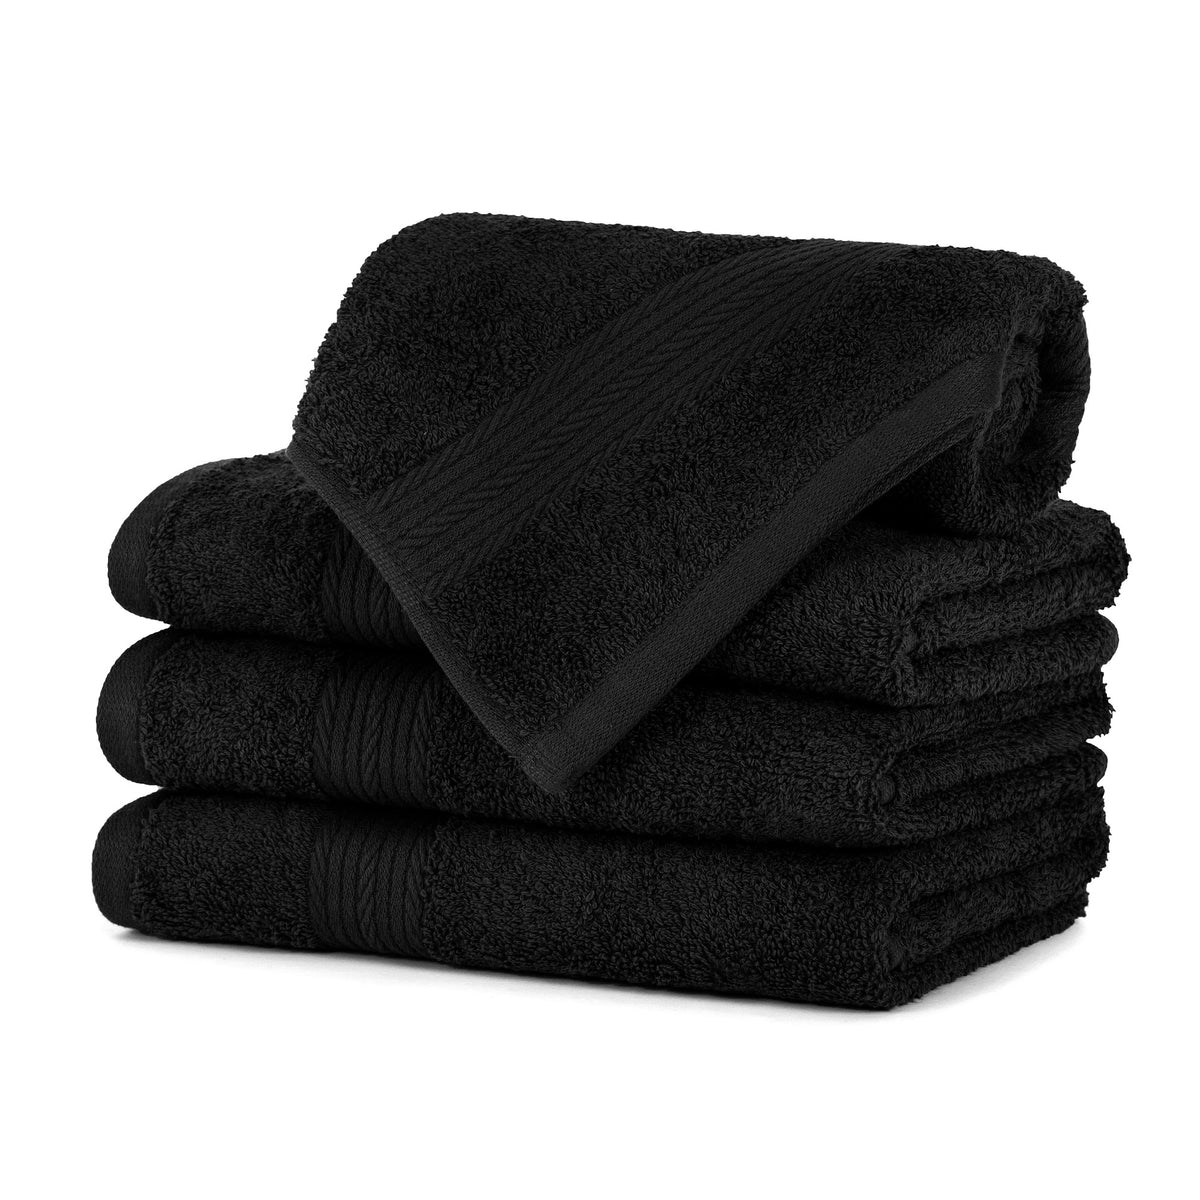 Hand Towel - Pack of 4